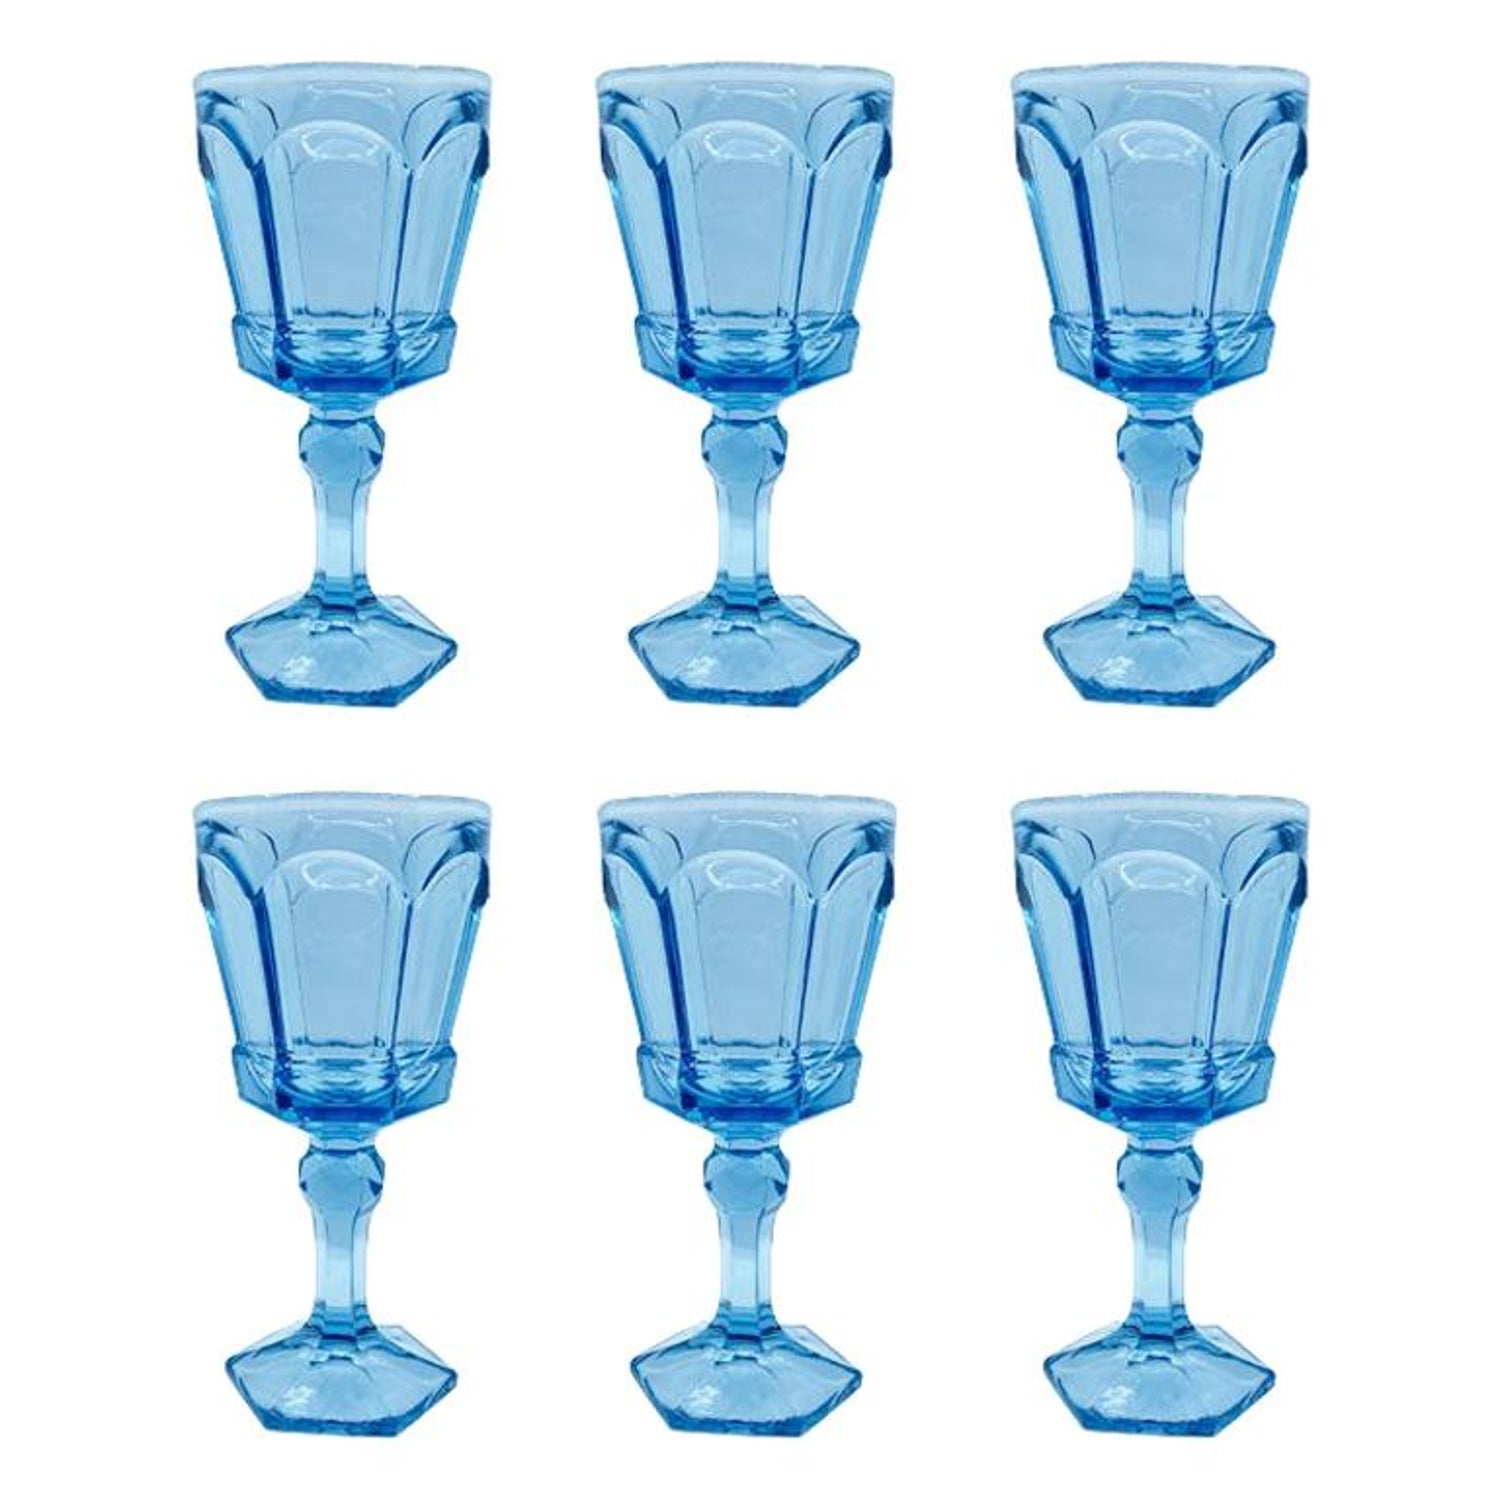 https://a.1stdibscdn.com/blue-faceted-virginia-pattern-drinking-glasses-by-fostoria-1980s-set-of-6-for-sale/1121189/f_236434321620291205390/23643432_master.jpg?width=1500